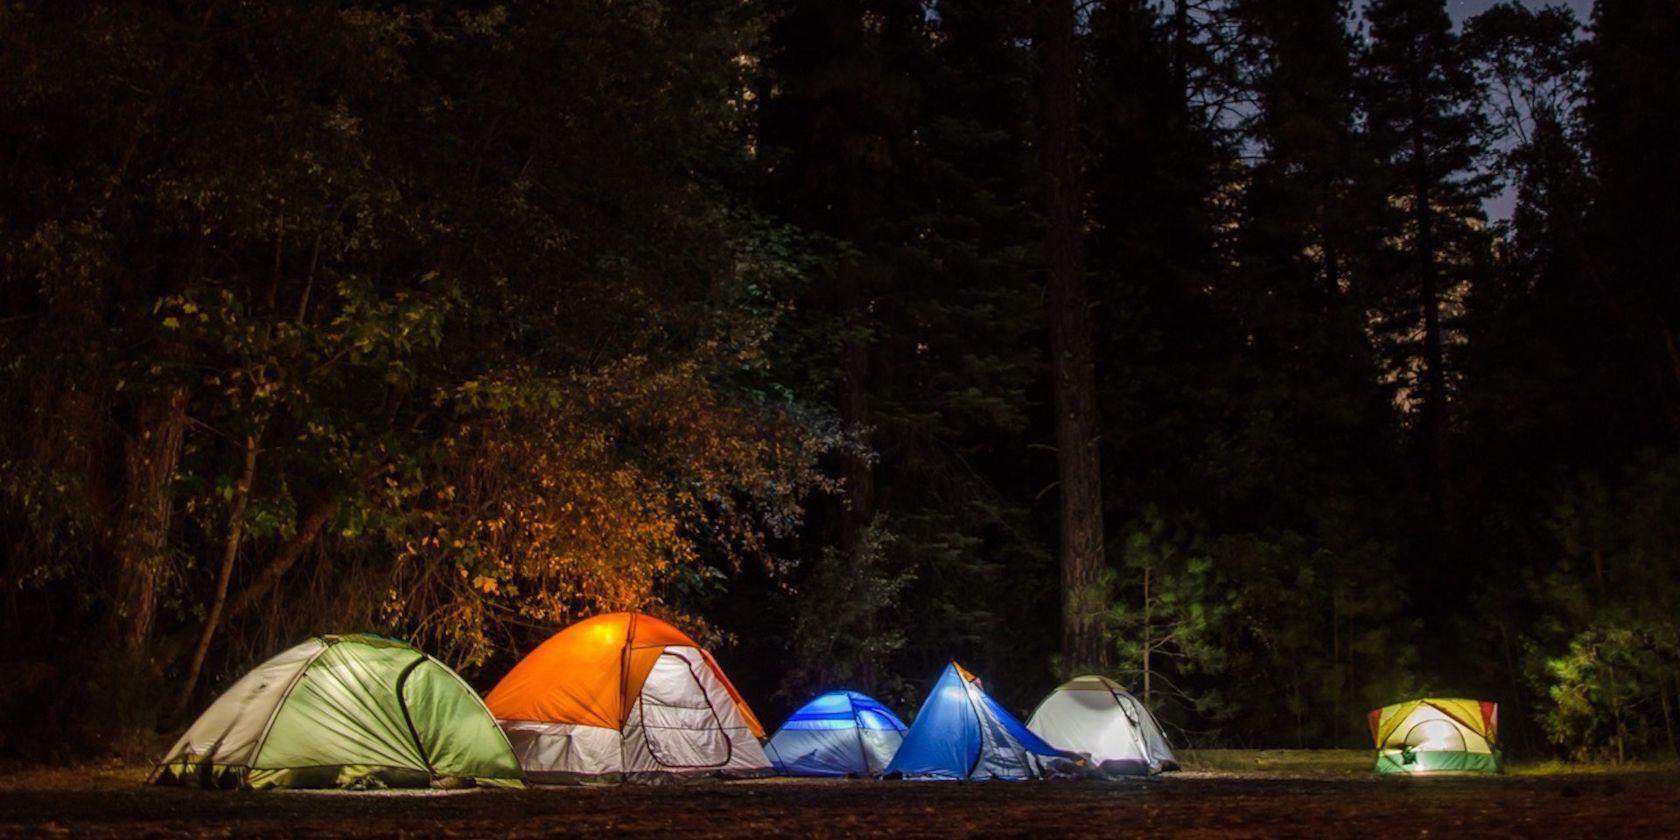 Six Camping Tents in Forest illuminated from within